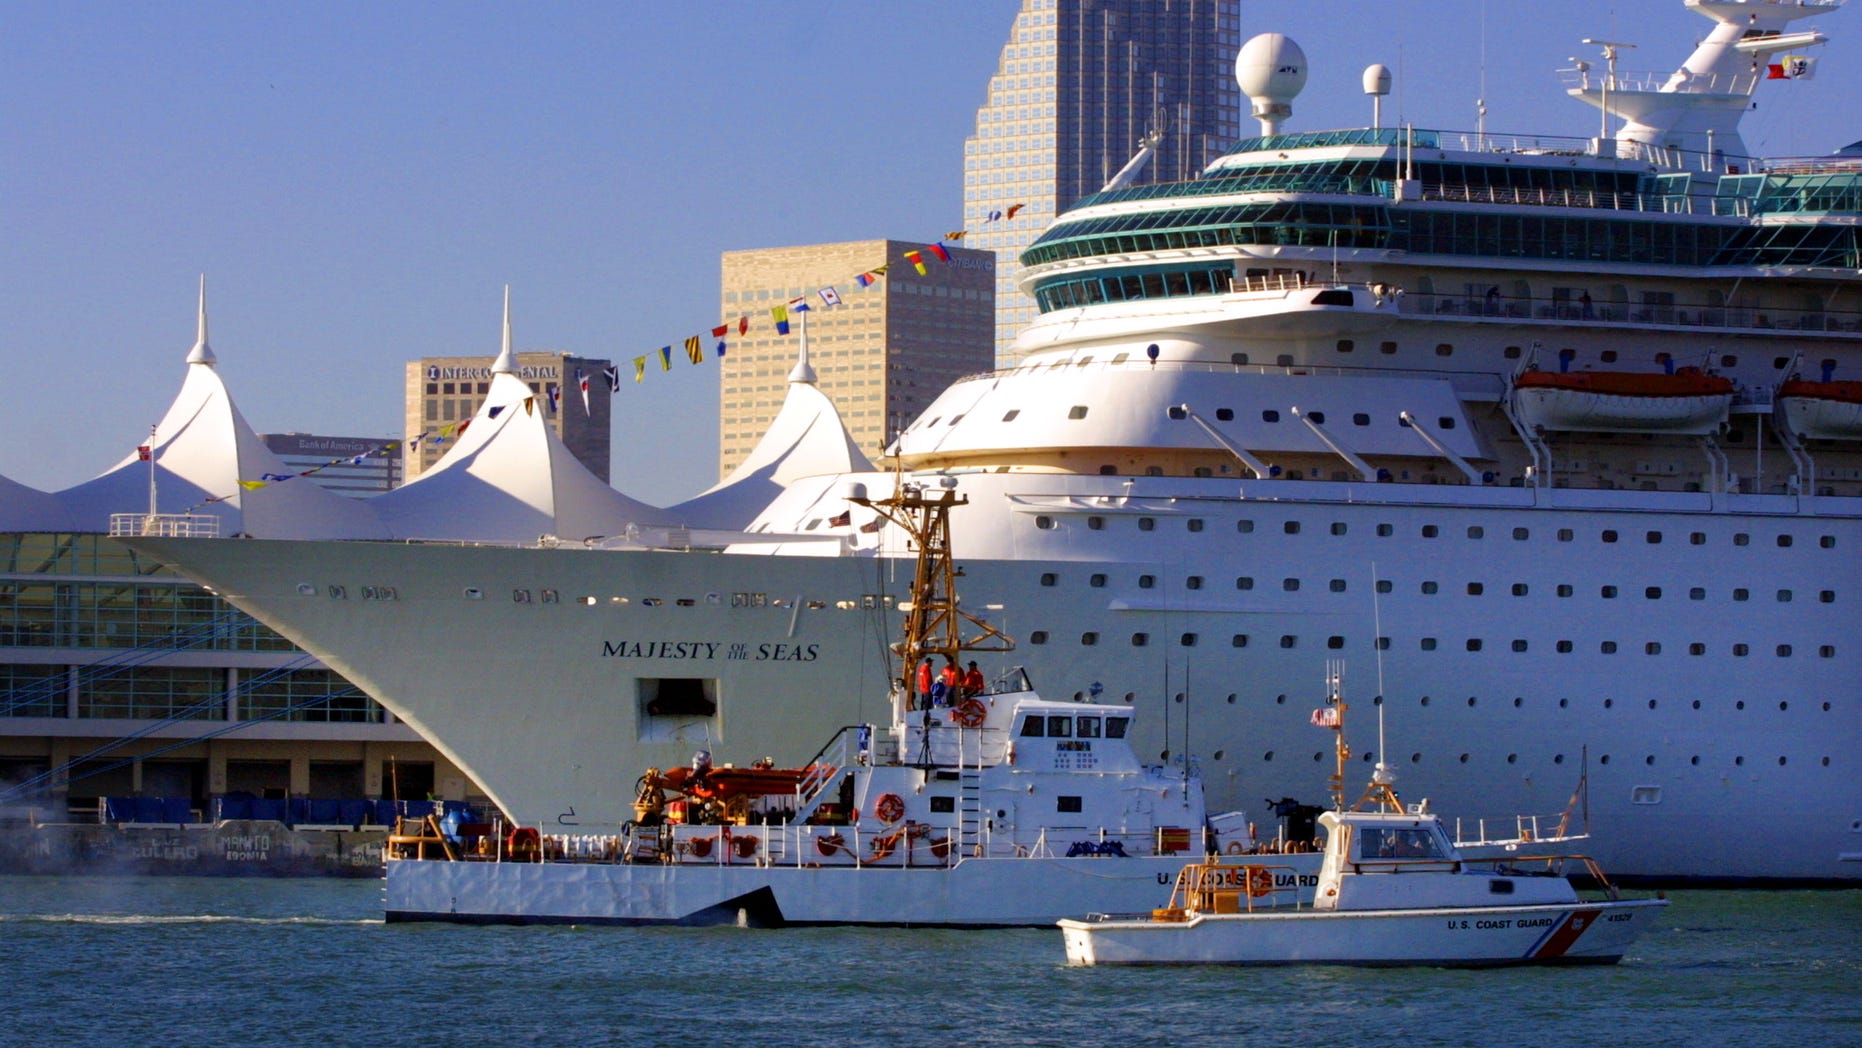 Coast Guard suspends search for Royal Caribbean cruise ship employee who went overboard